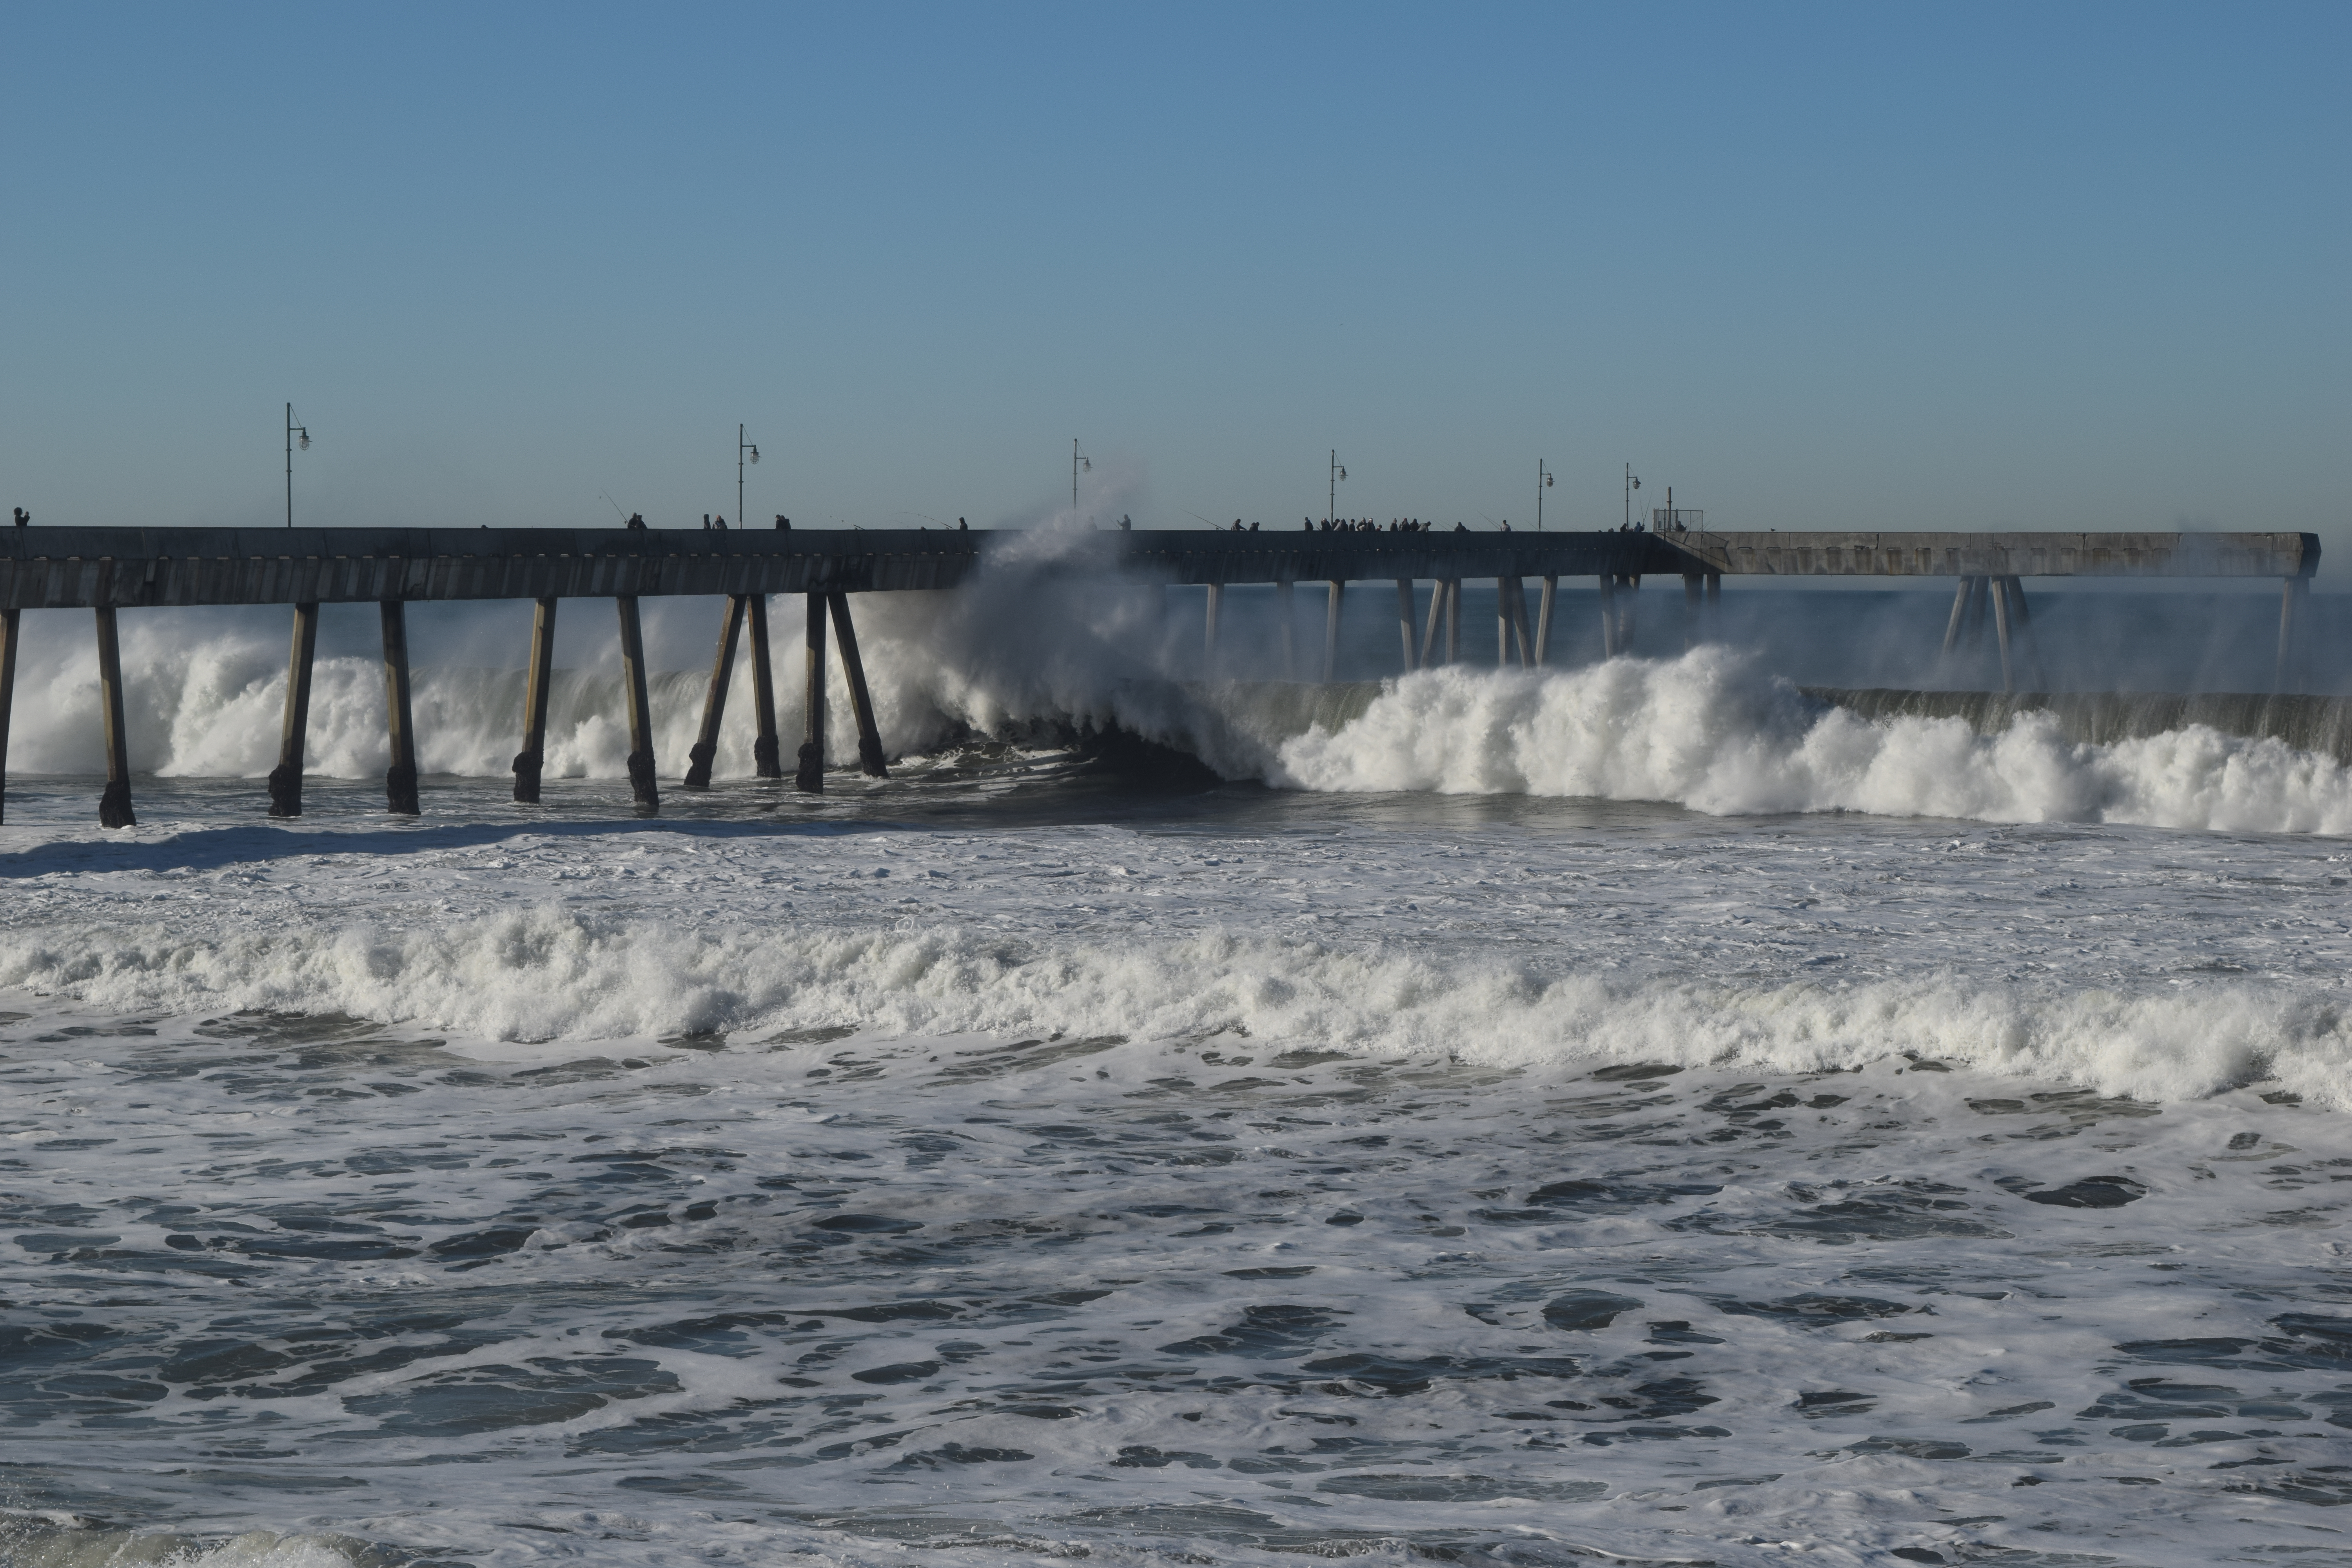 Pacifica pier area and the waves photo